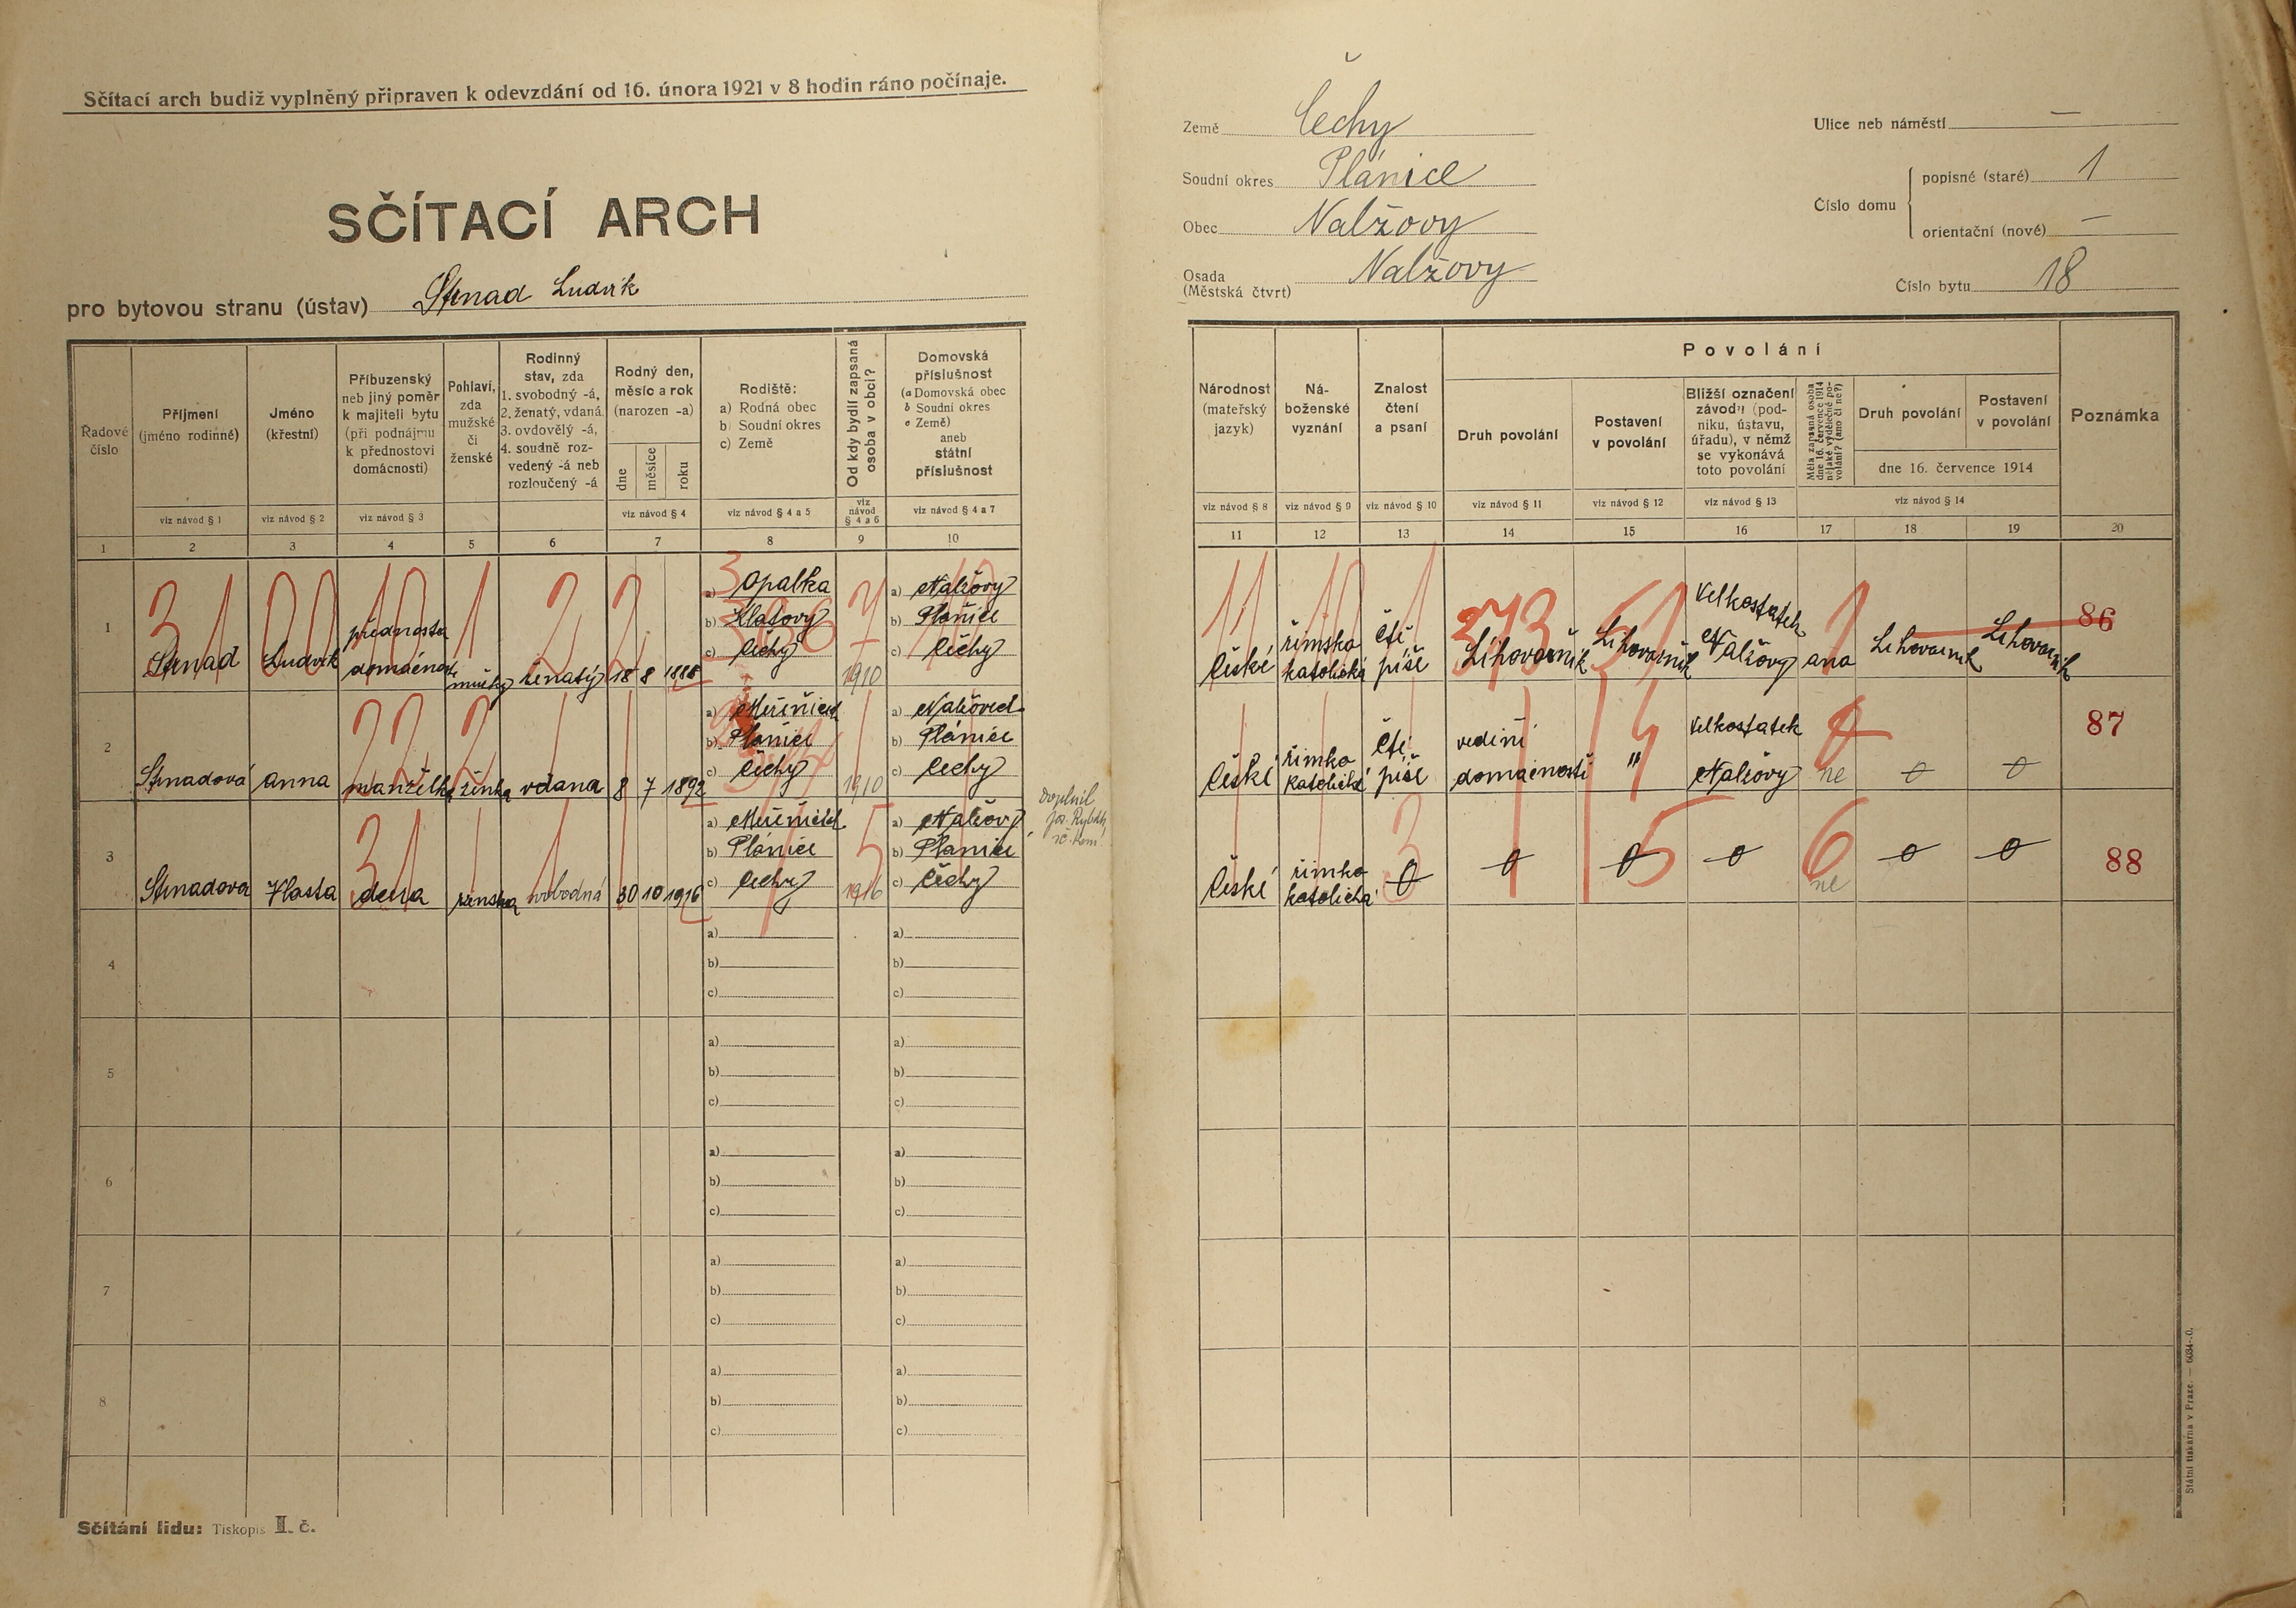 37. soap-kt_01159_census-1921-nalzovy-cp001_0370